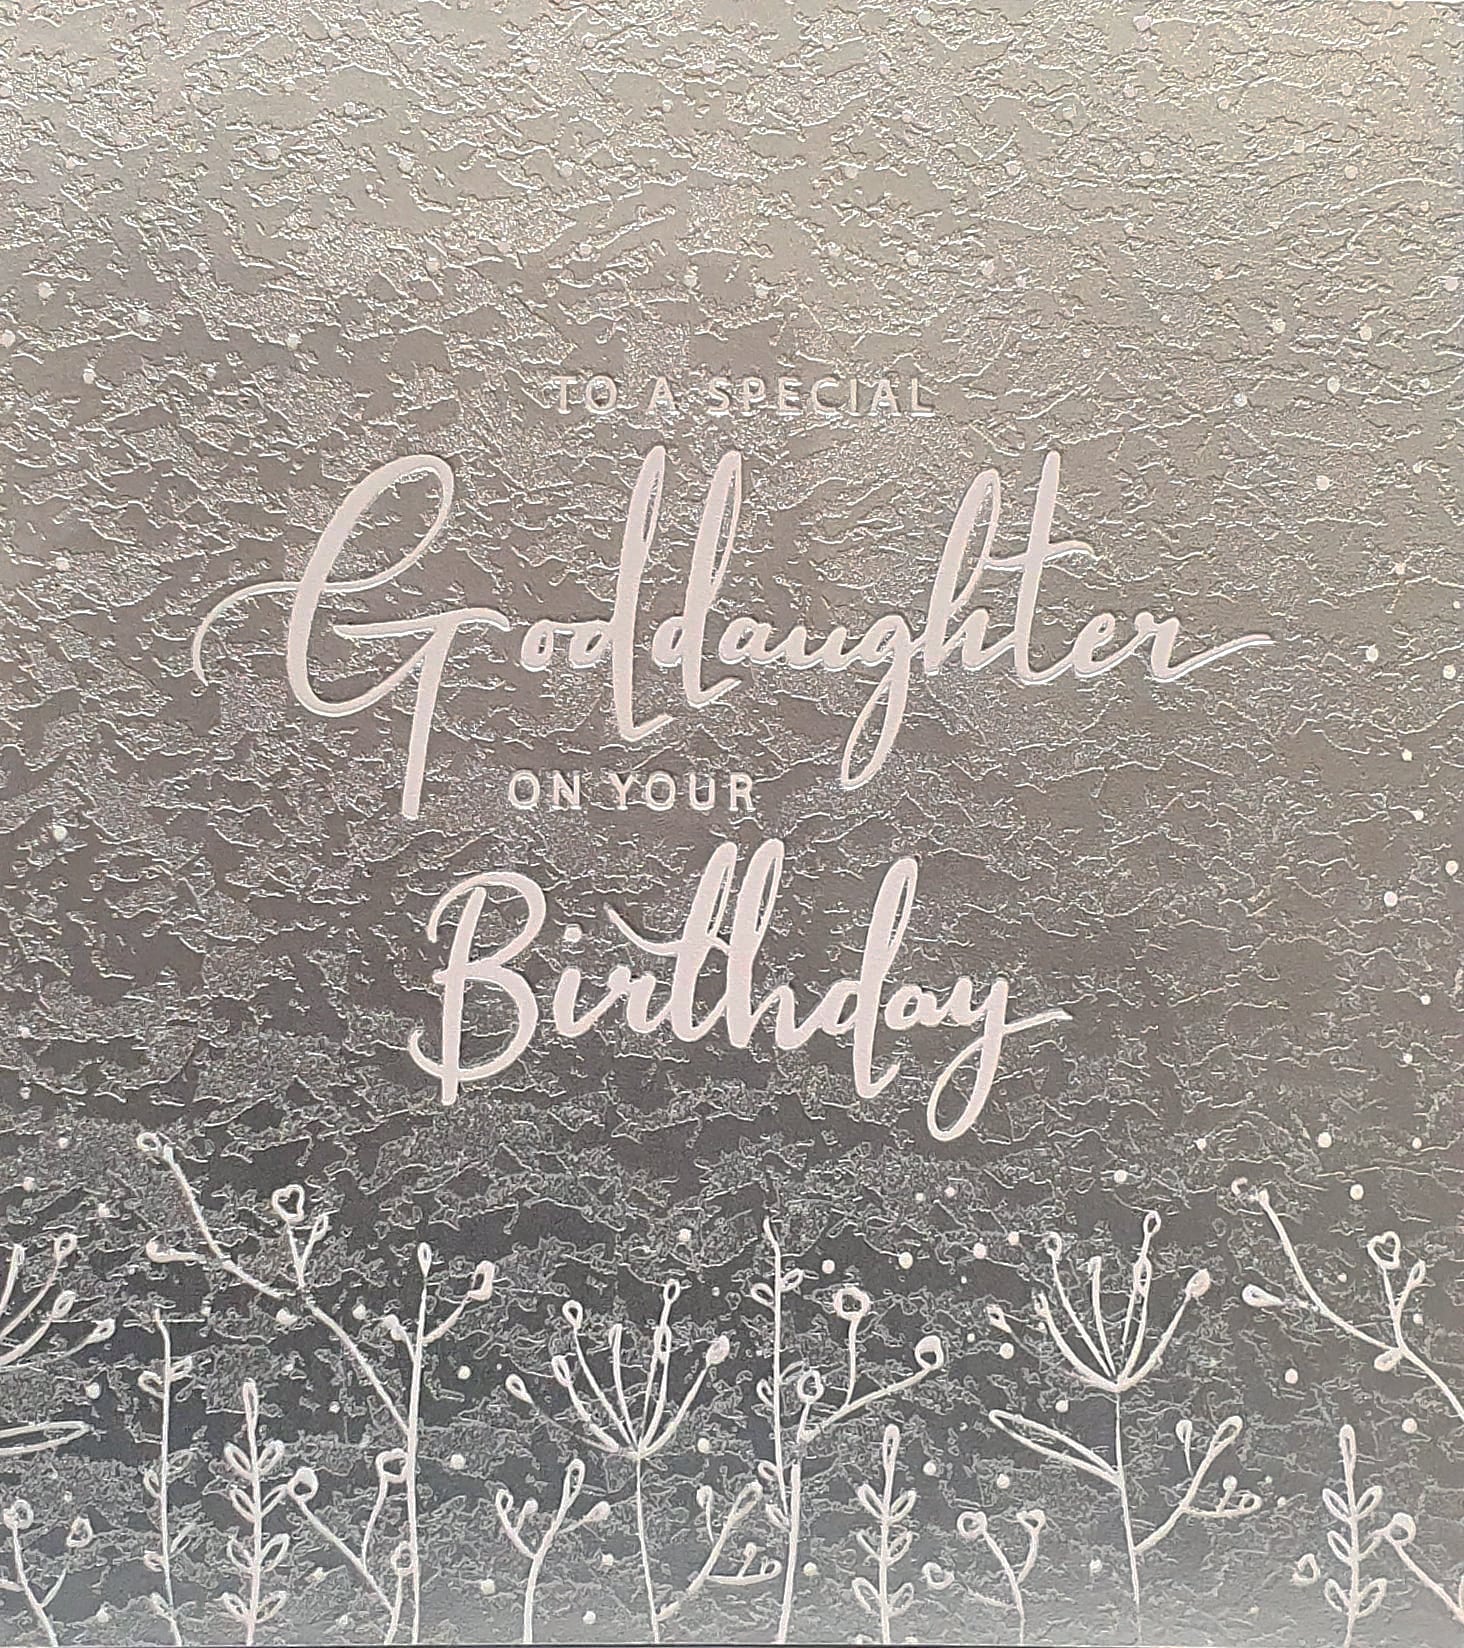 Goddaughter Birthday Card - Simplicity And Modern